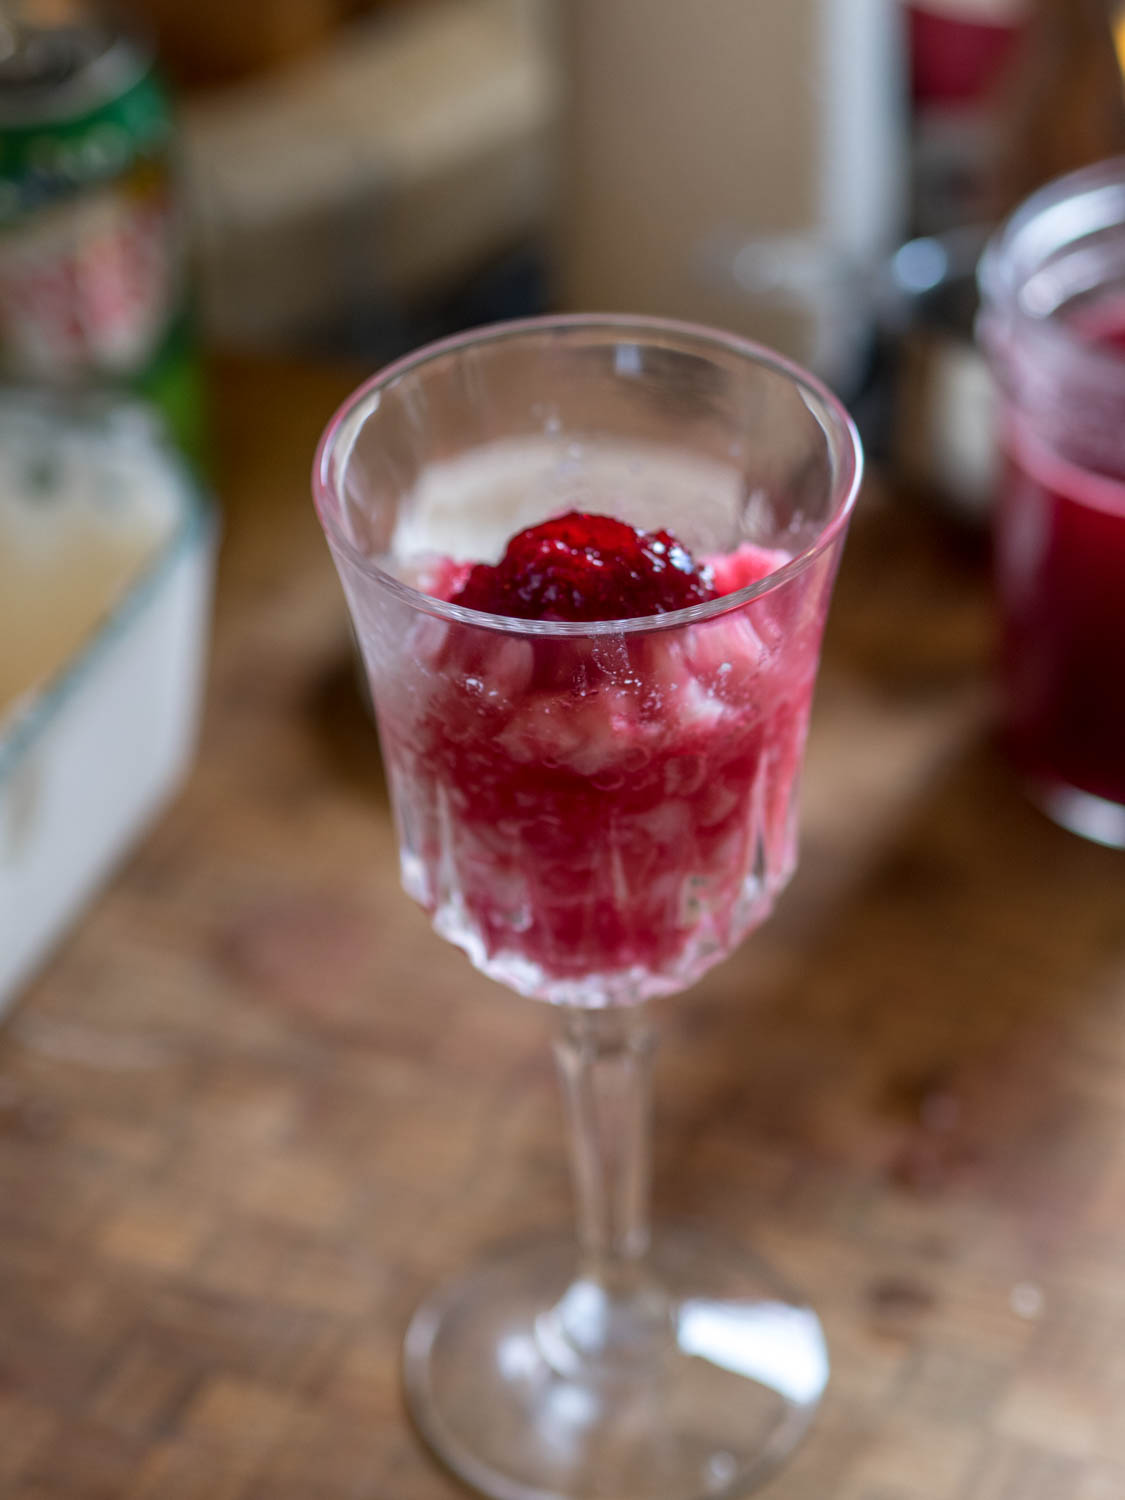 Add some cranberry shrub to up the pink-levels